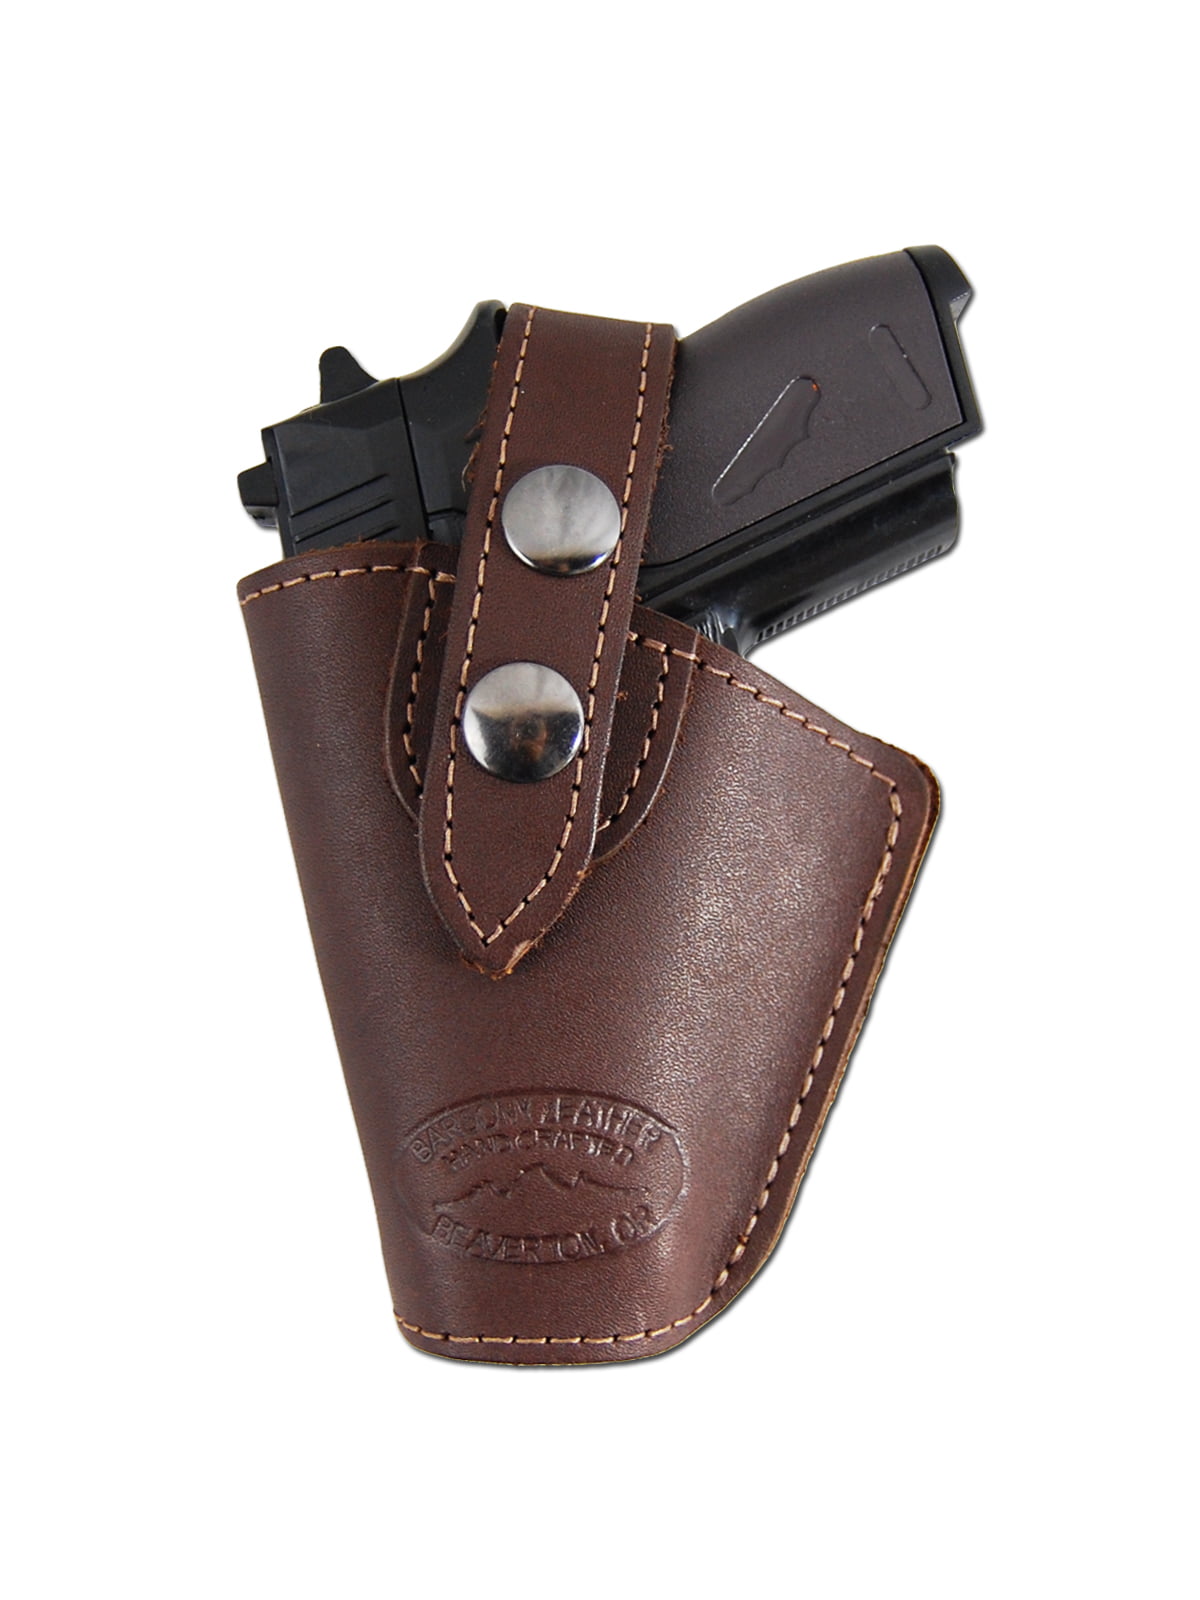 OWB Right Hand Thumb Break Leather Belt Holster Fits WALTHER PPK/s 